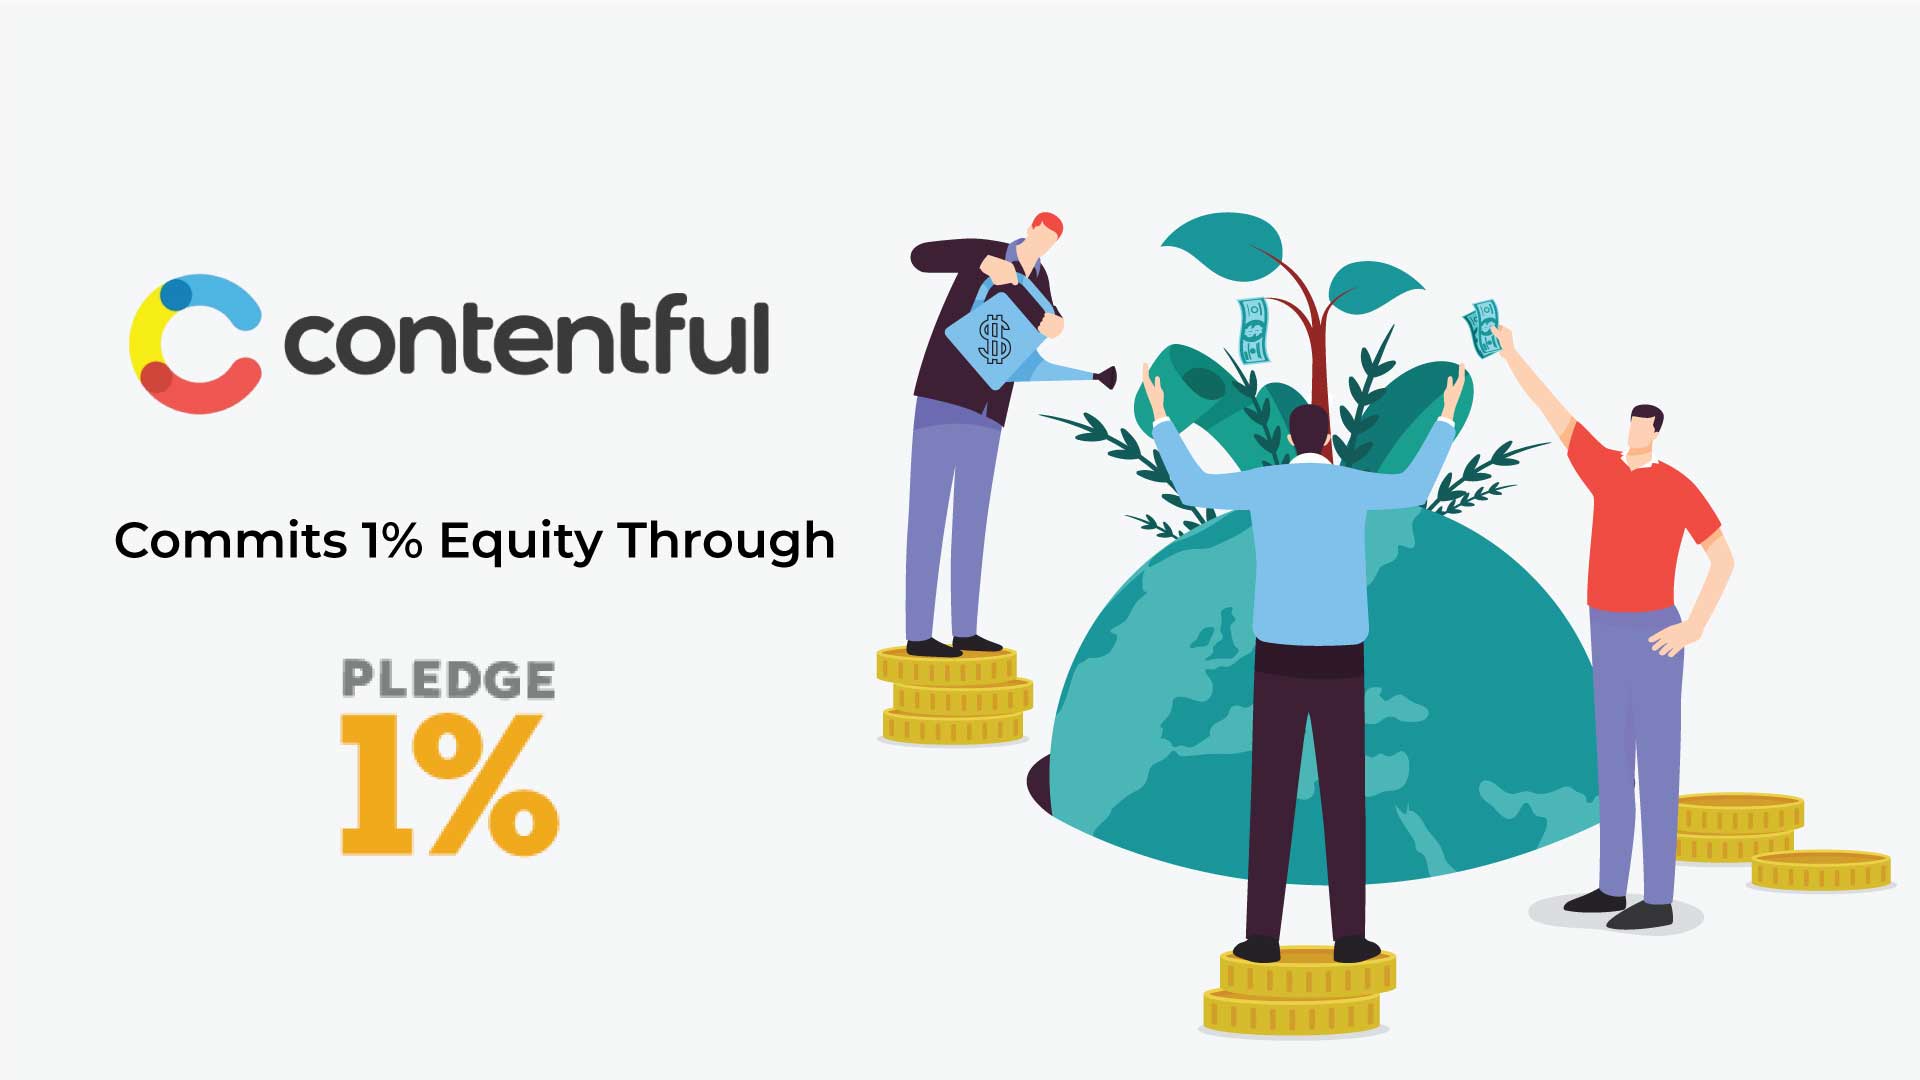 Contentful Joins Pledge 1% Movement with Equity Commitment